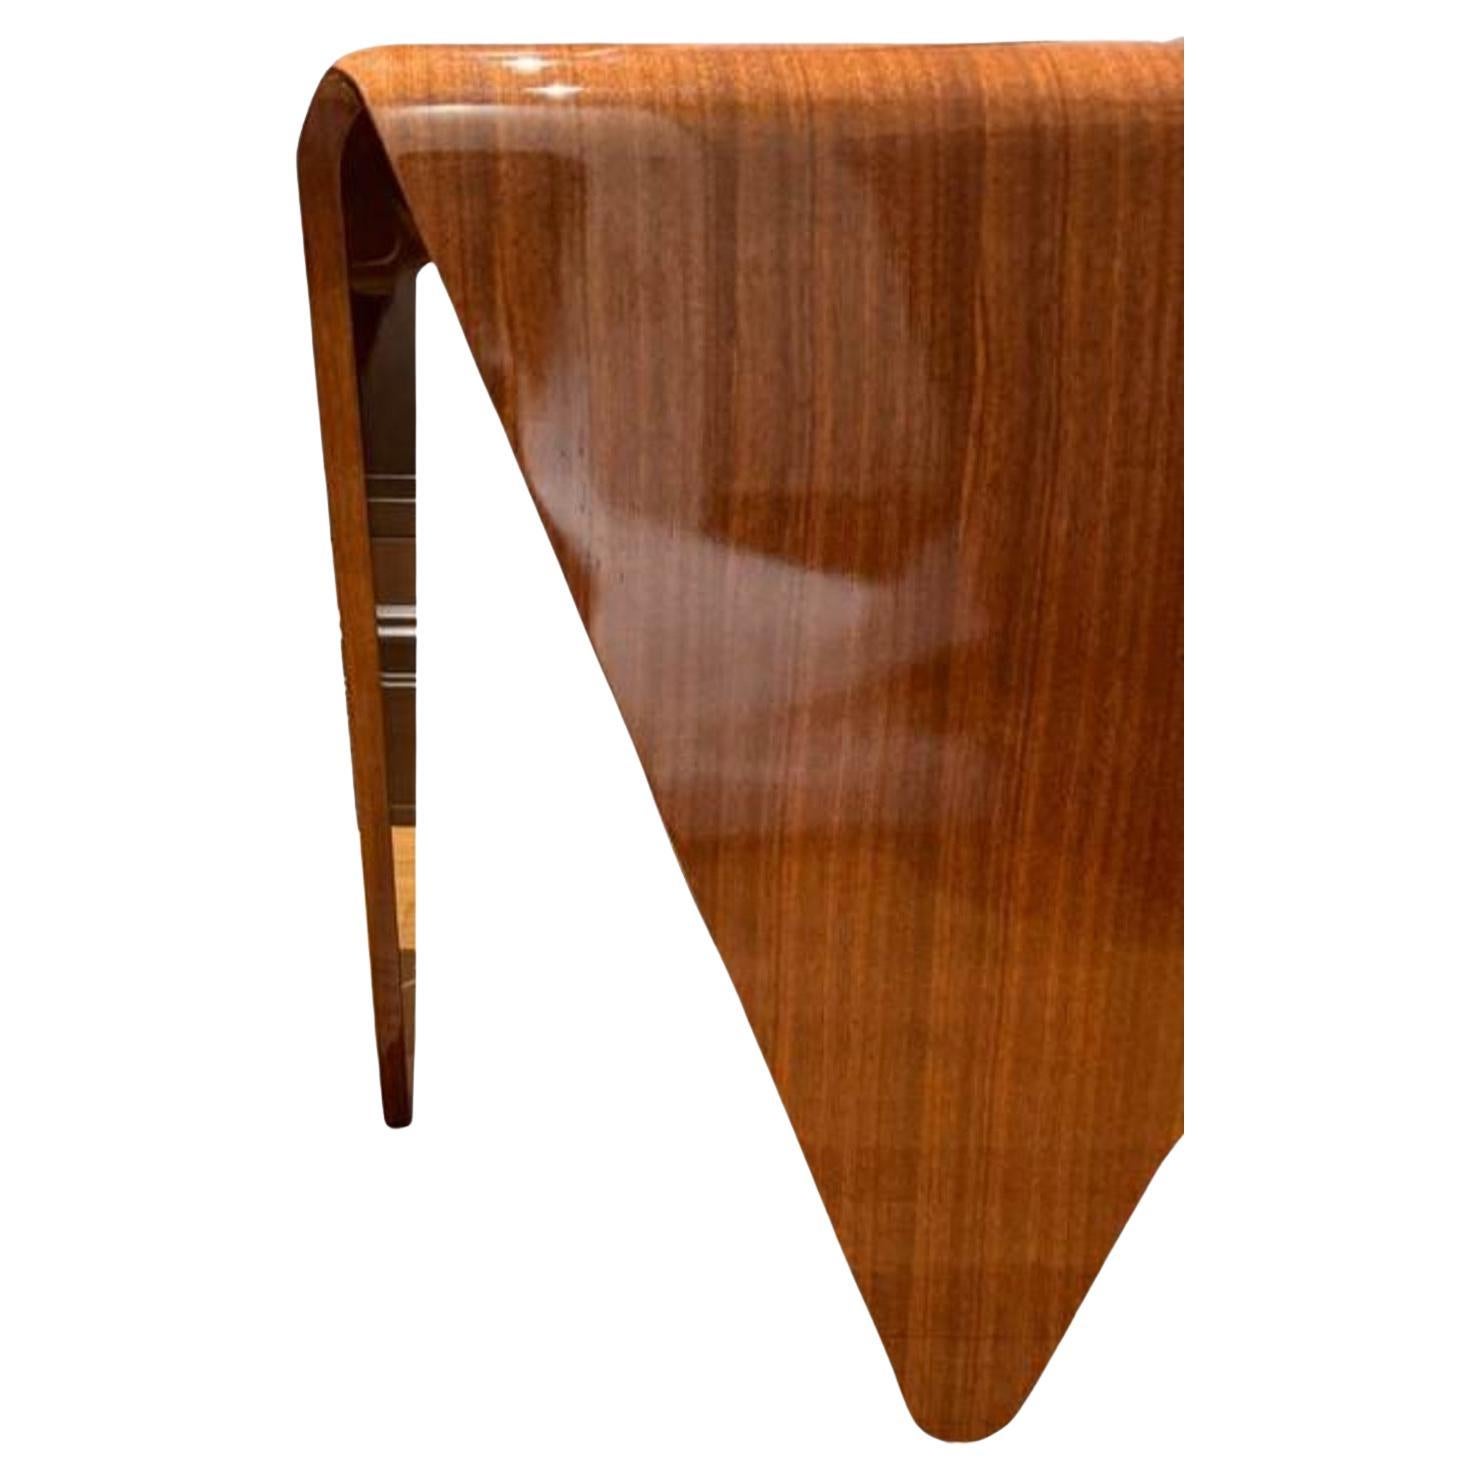 These side tables has a lead time of 5-6 weeks upon stain sample approval. 

There are a number of stains and wood species available as shown in the images attached. 

New production. Made to order. Designed and made in NYC. One day delivery is